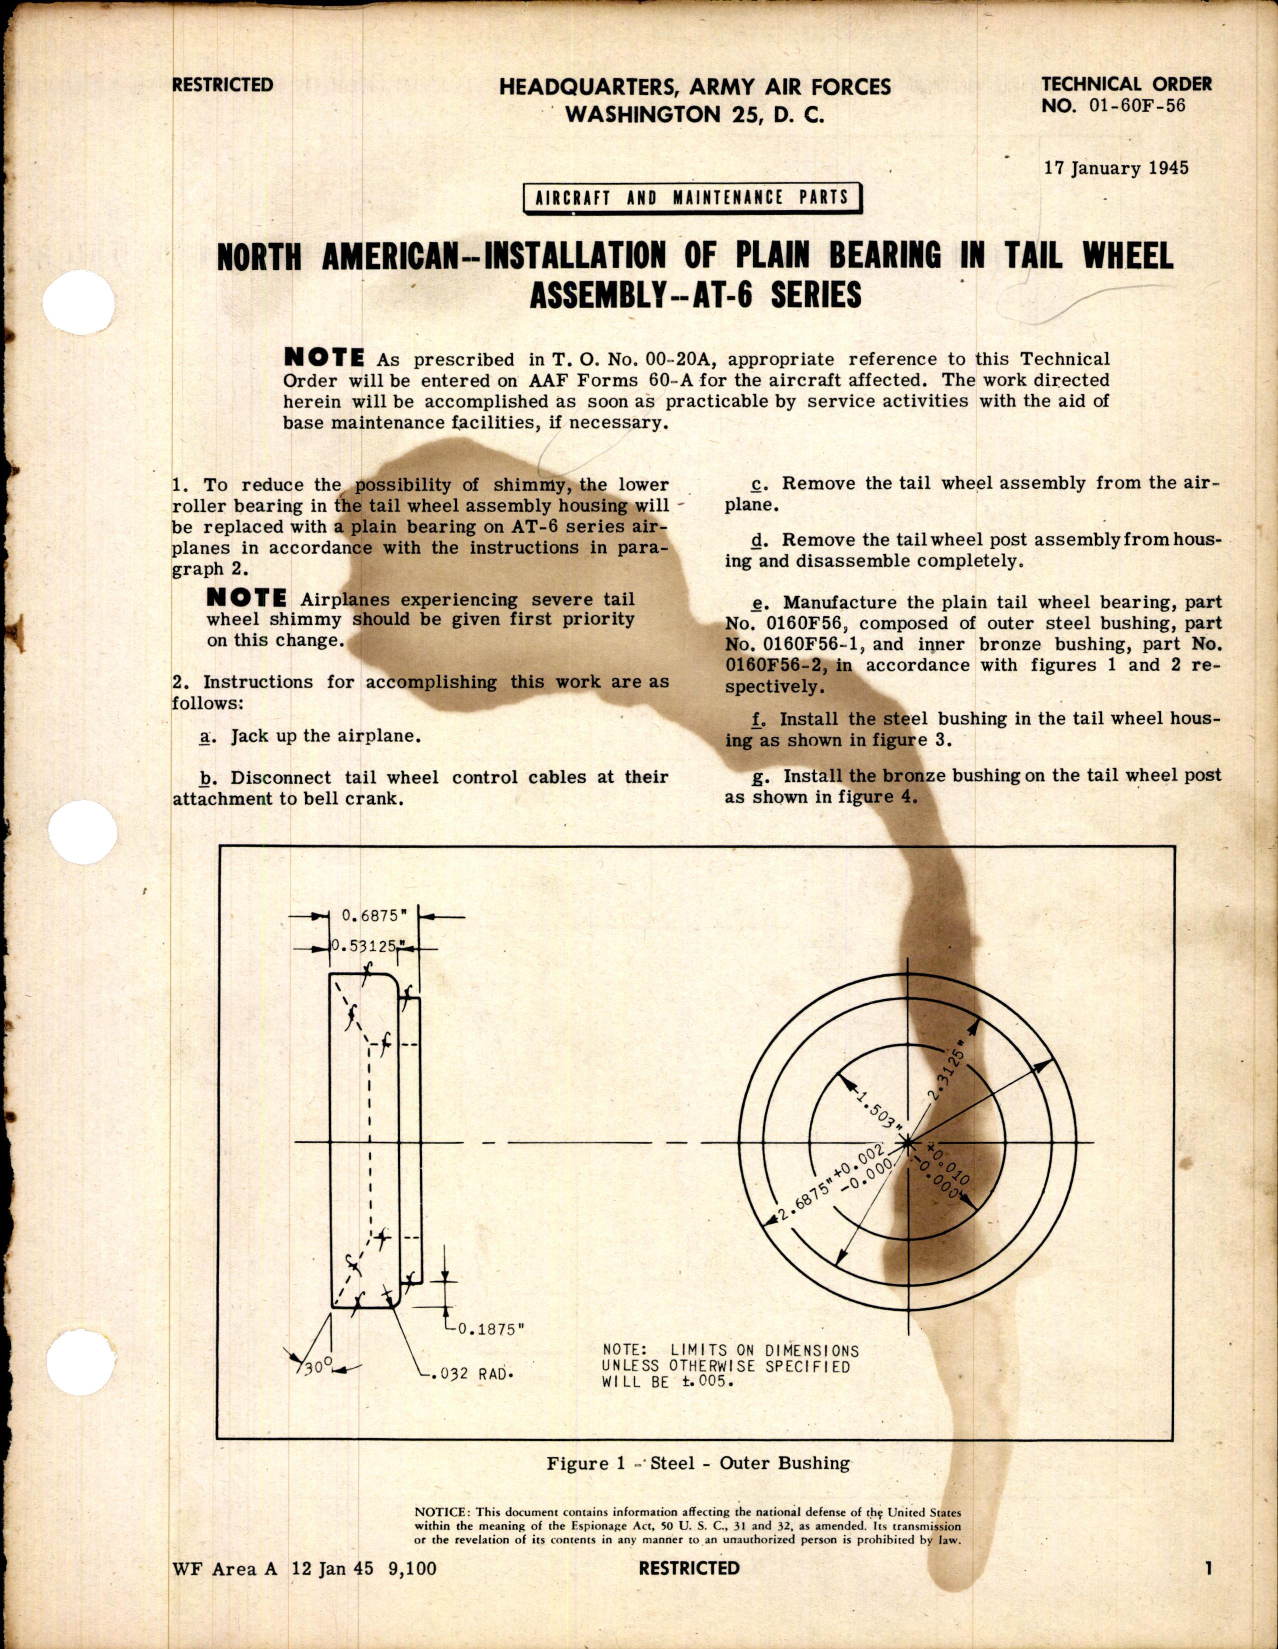 Sample page 1 from AirCorps Library document: Installation of Plain Bearing in Tail Wheel Assembly for AT-6 Series